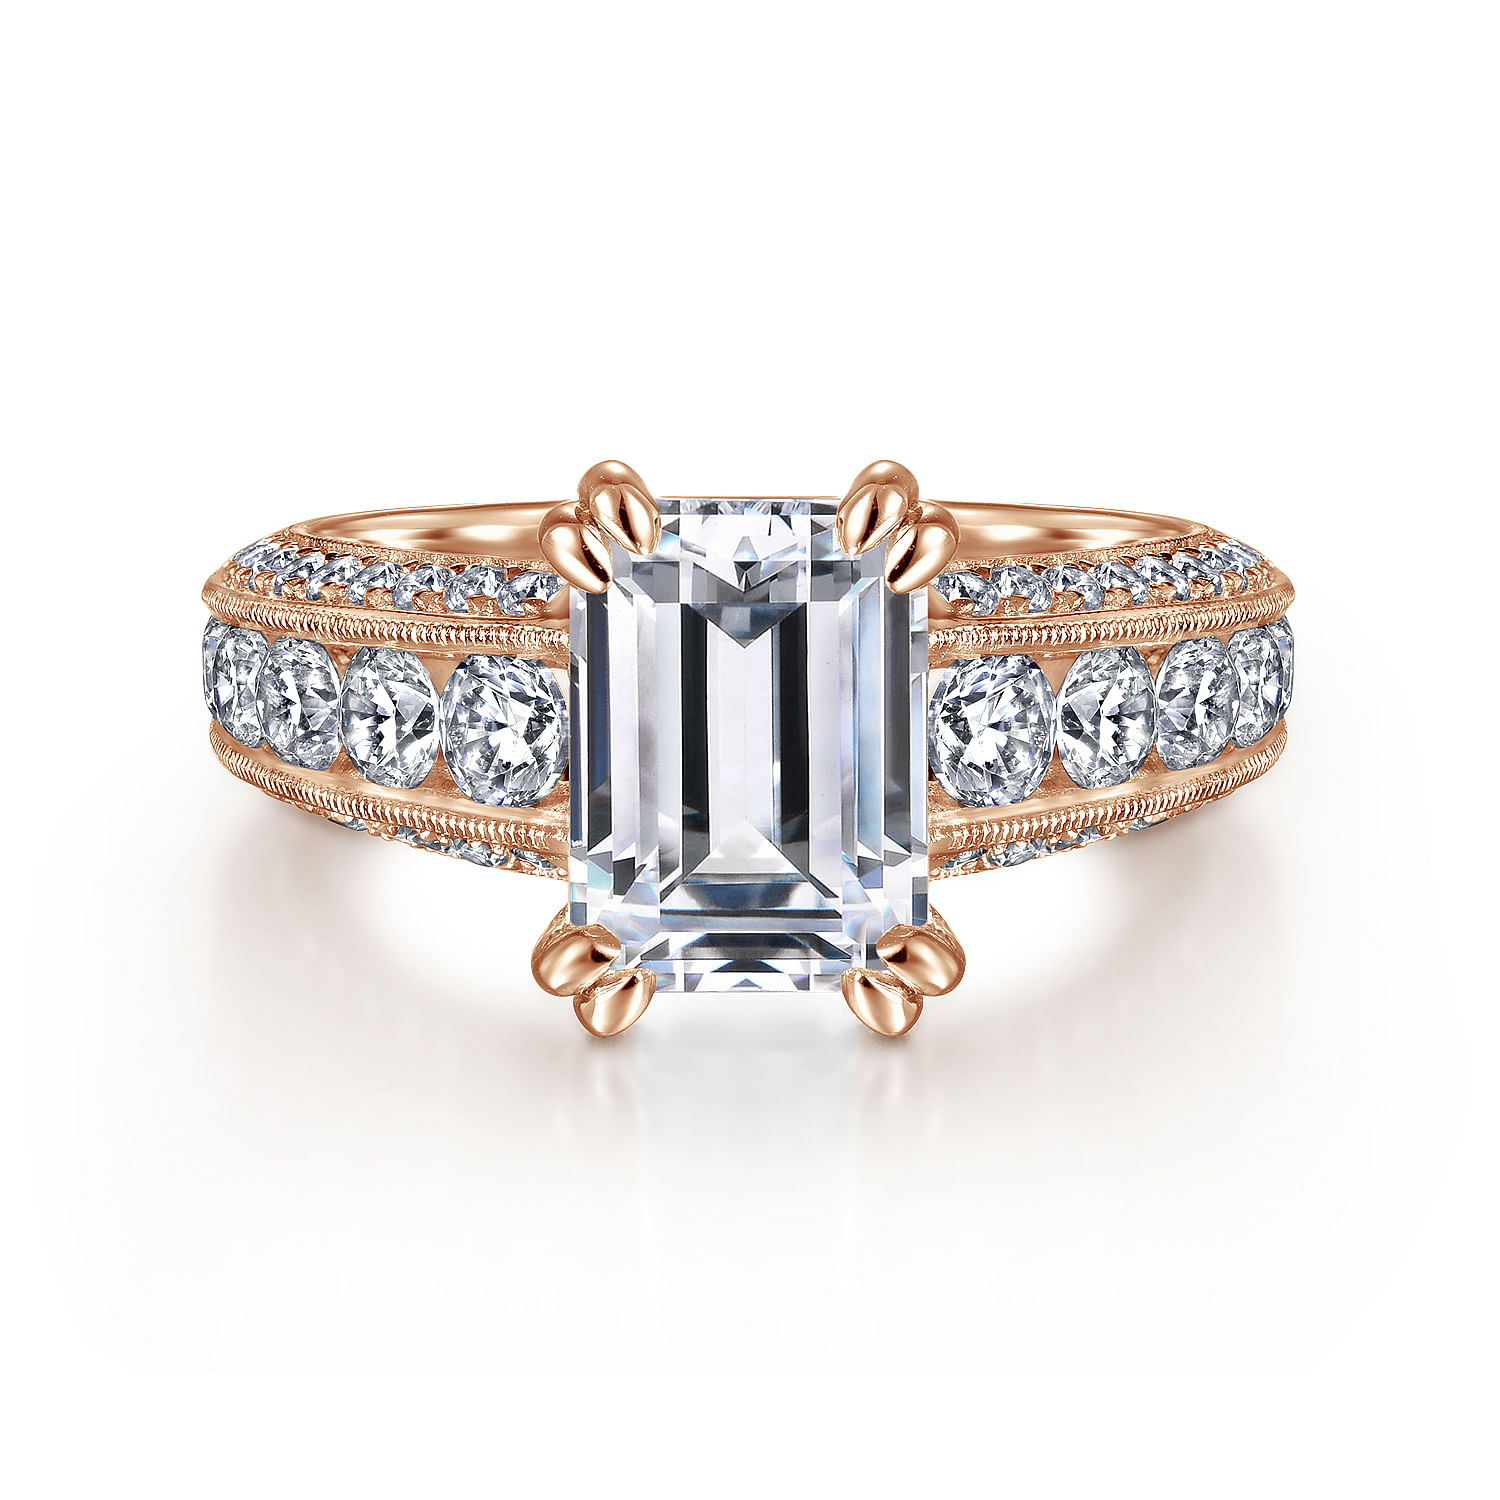 Vintage Inspired 14K Rose Gold Wide Band Emerald Cut Diamond Engagement Ring